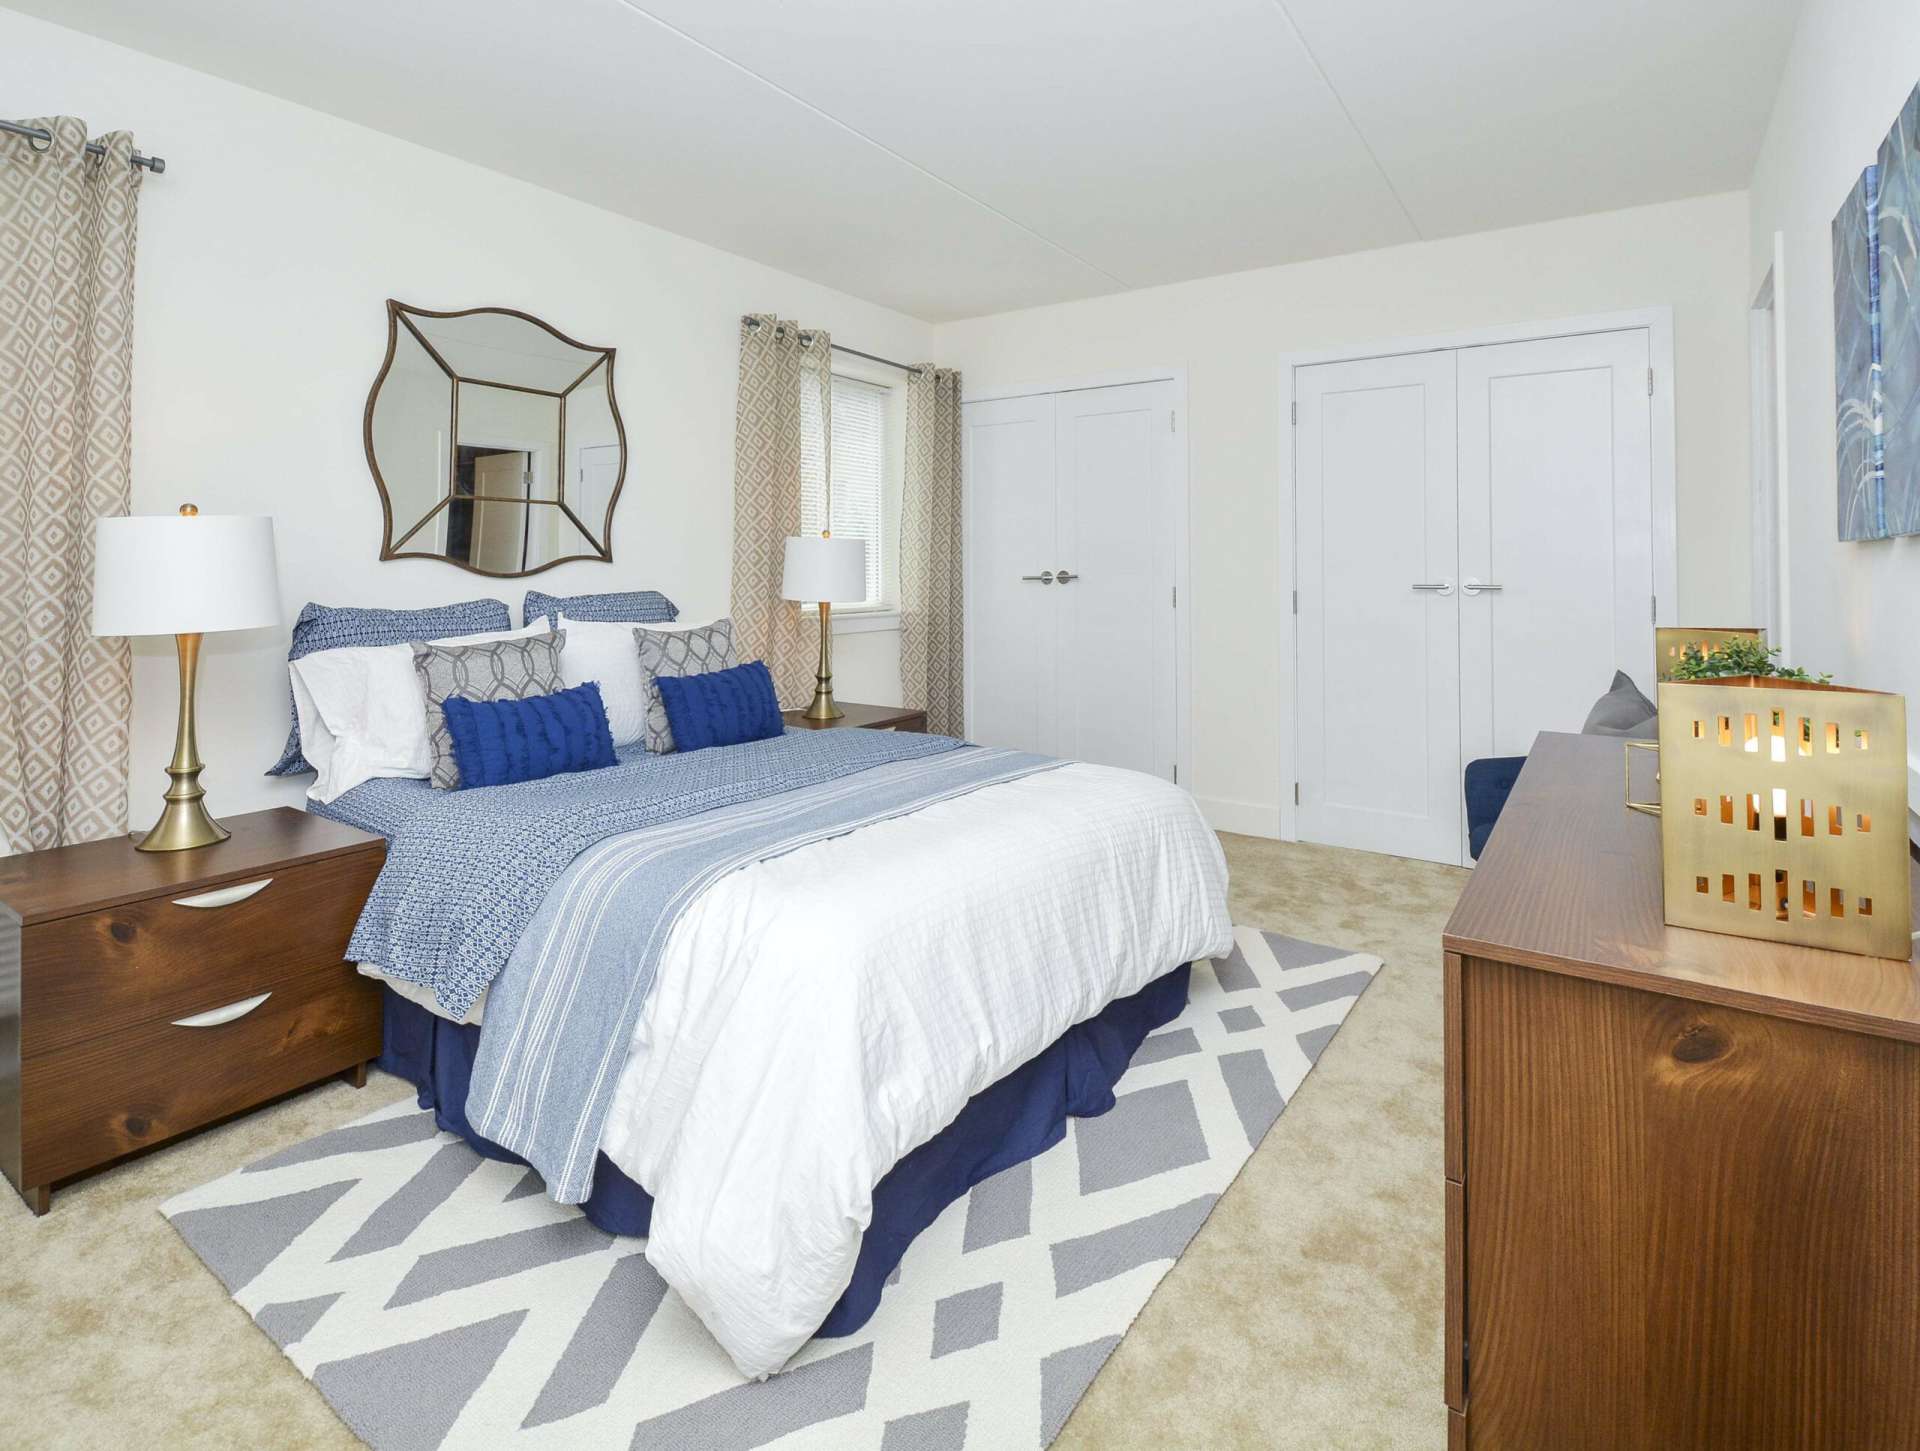 Spacious and carpeted bedroom with closet space and 2 windows.